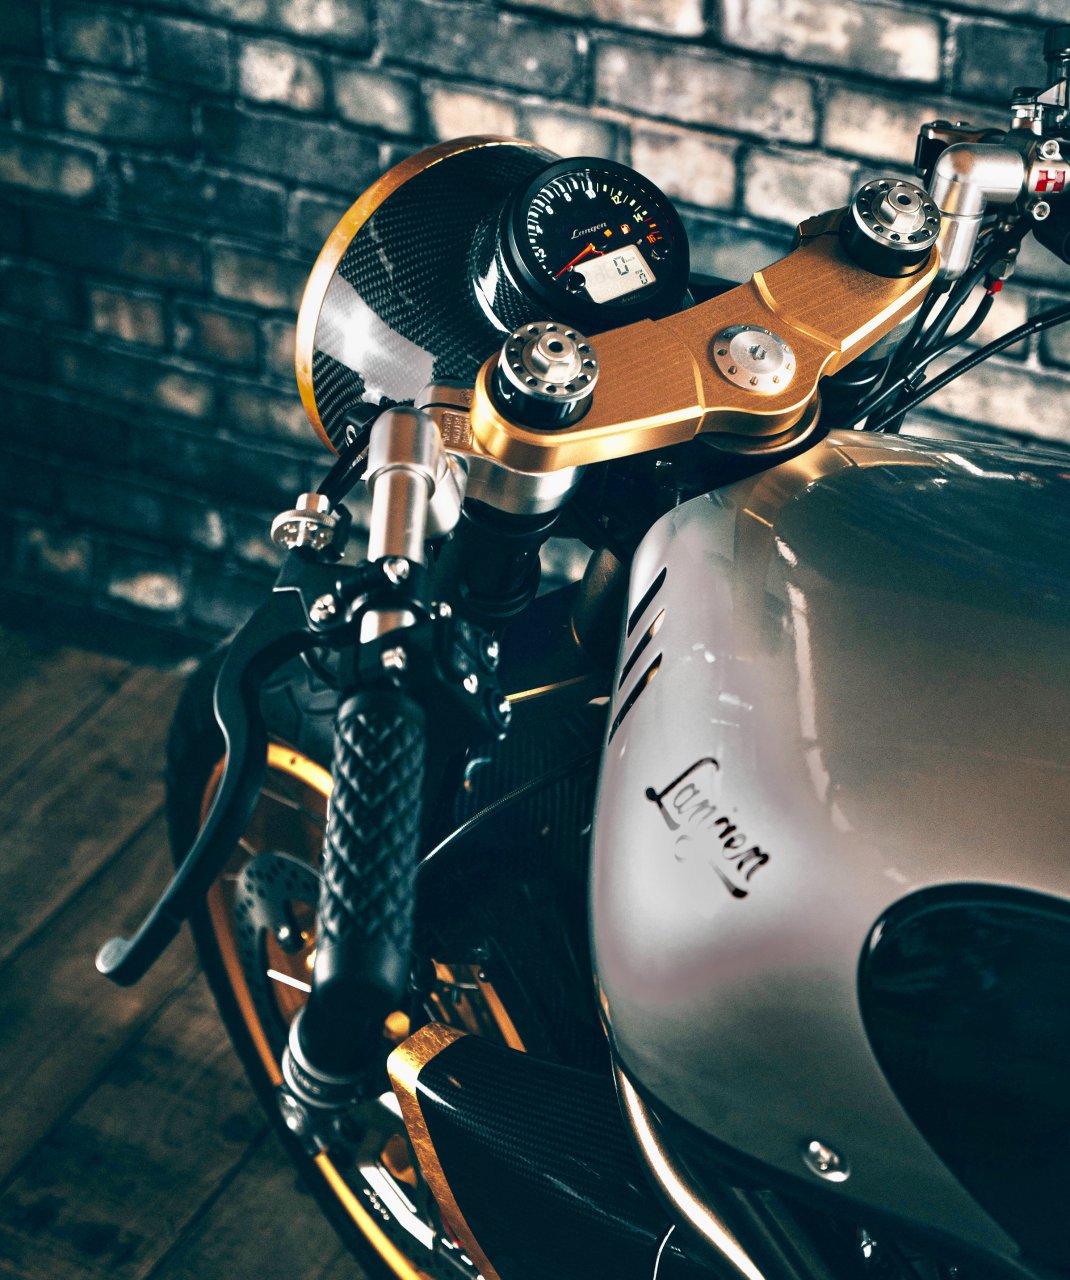 Motorcycle, New British motorcycle company plans Salon Privé launch, ClassicCars.com Journal